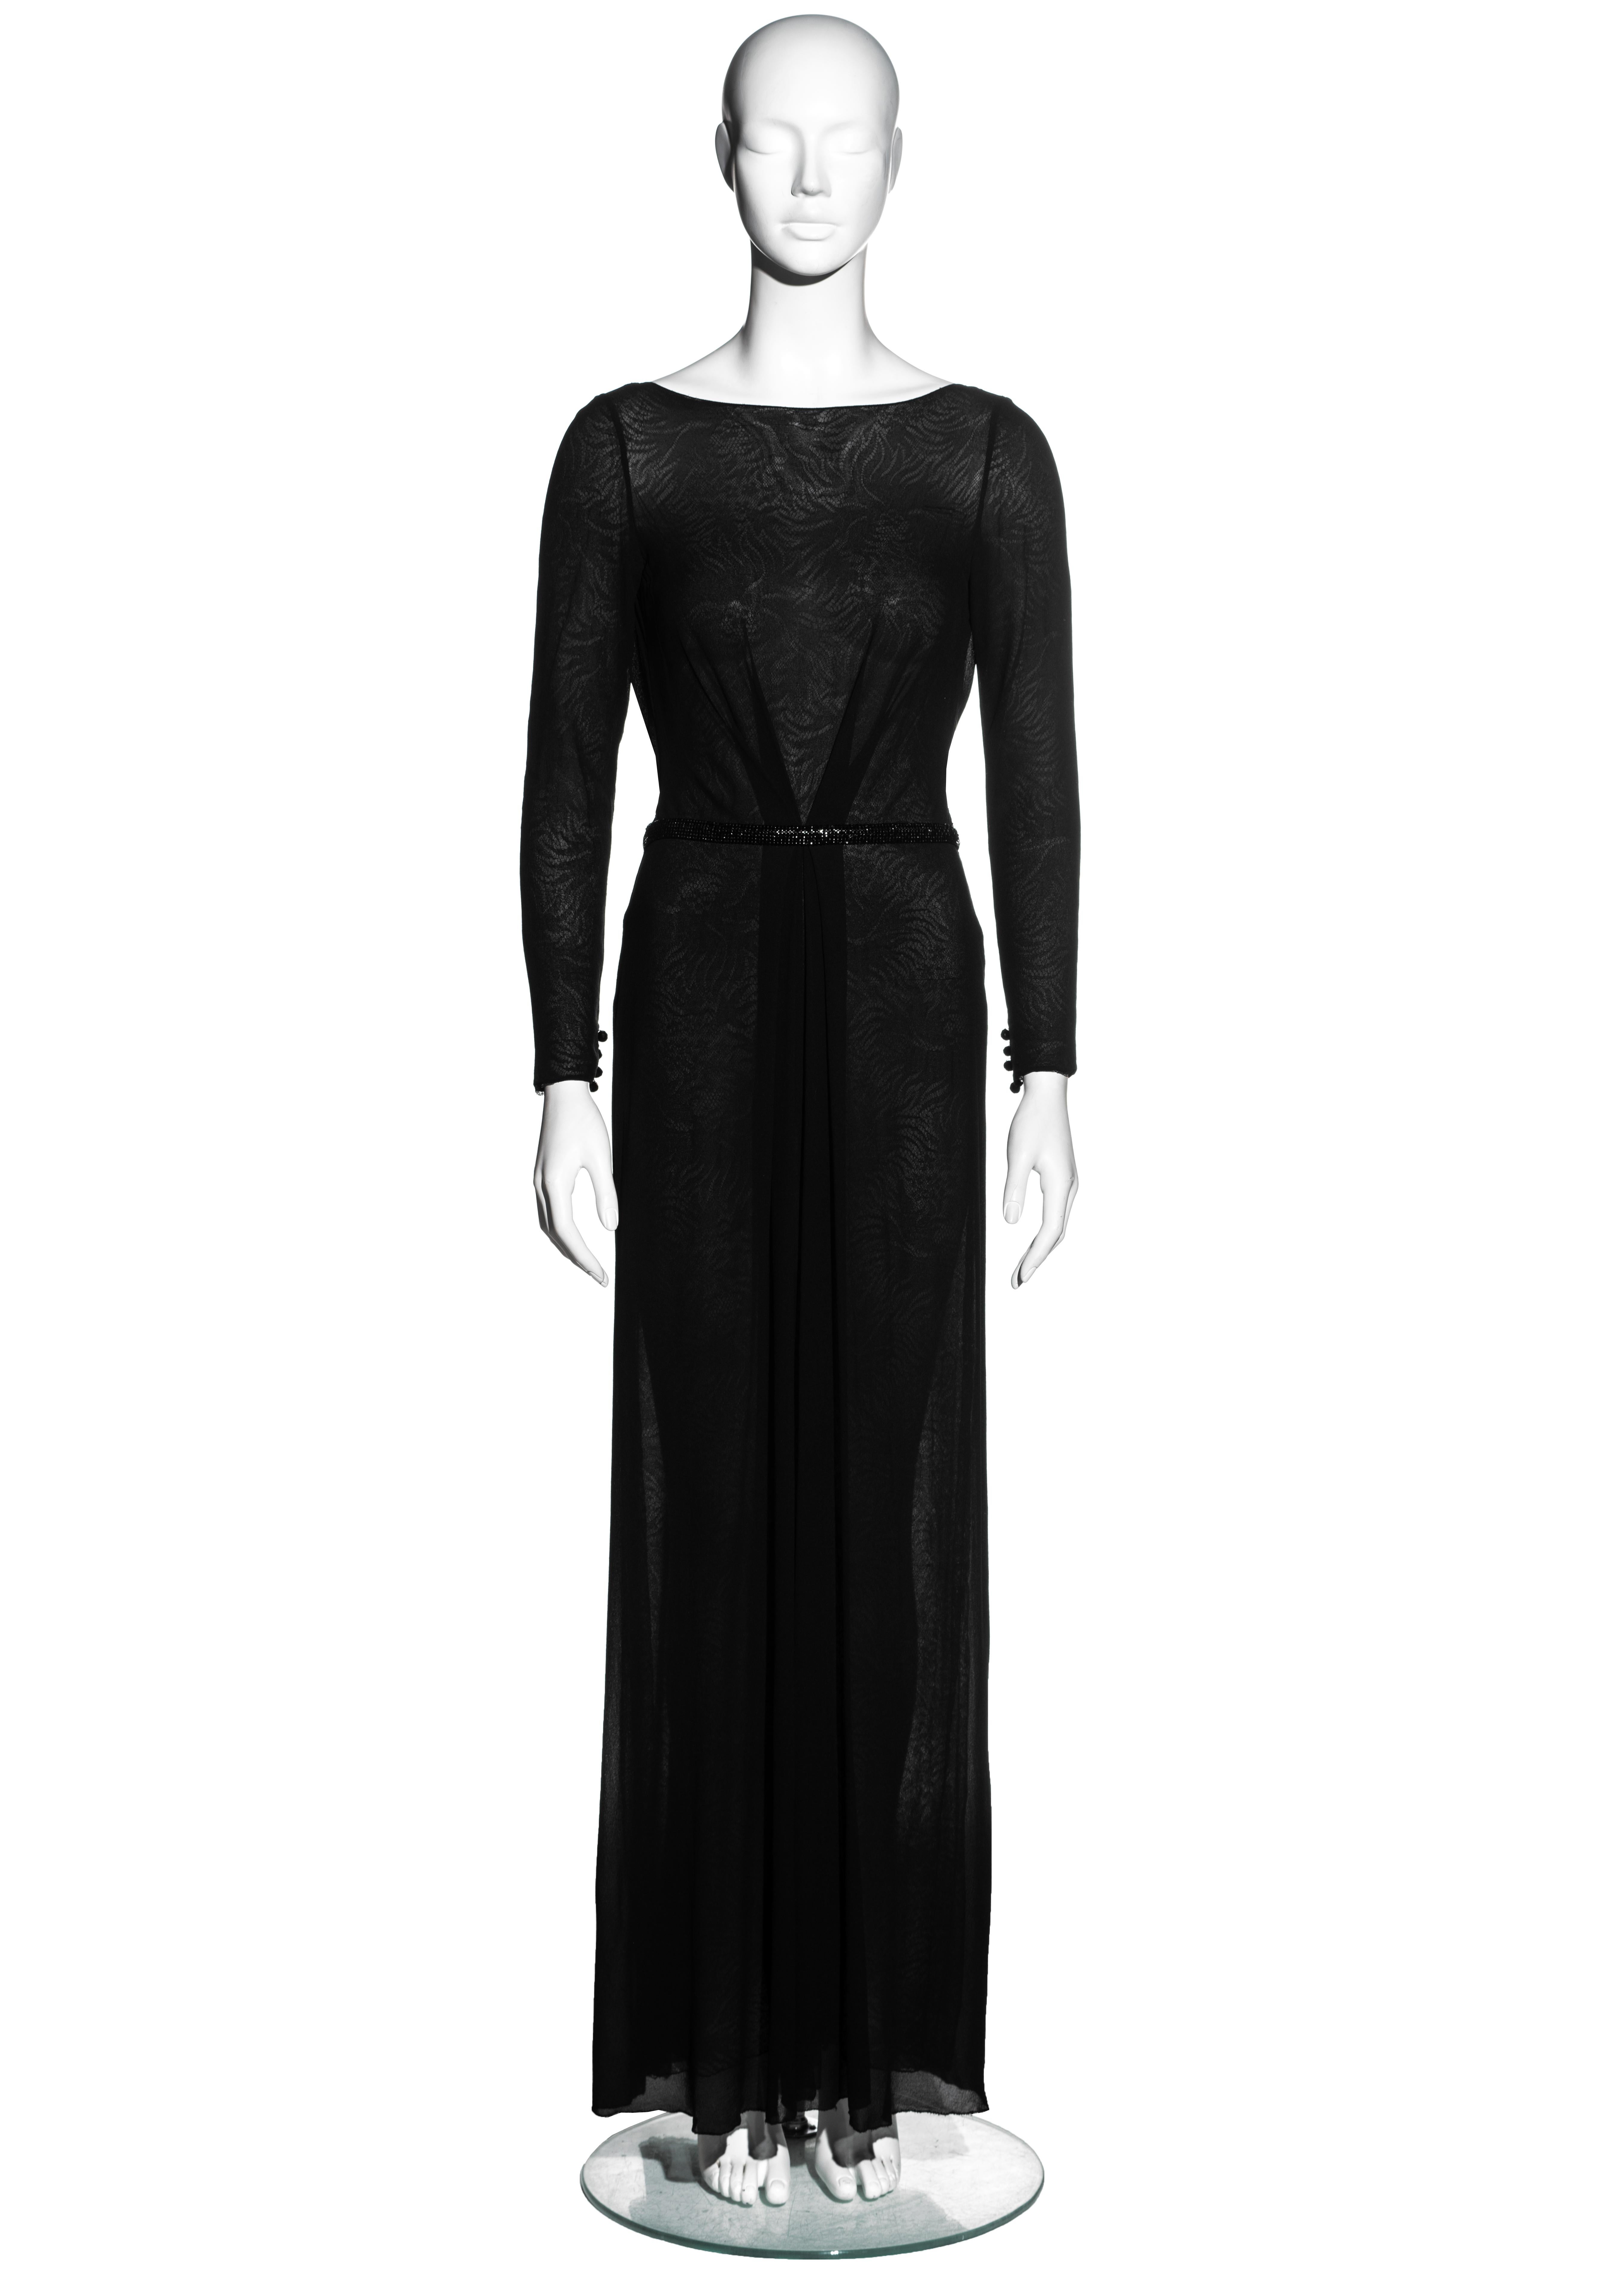 ▪ Gianni Versace black silk evening wrap dress
▪ Lace underlay 
▪ Open back 
▪ Beaded belt fastening 
▪ Boat neck
▪ Pleated detail at waist 
▪ Draped detail at back fastening 
▪ IT 38 - FR 34 - UK 6
▪ Fall-Winter 2000
